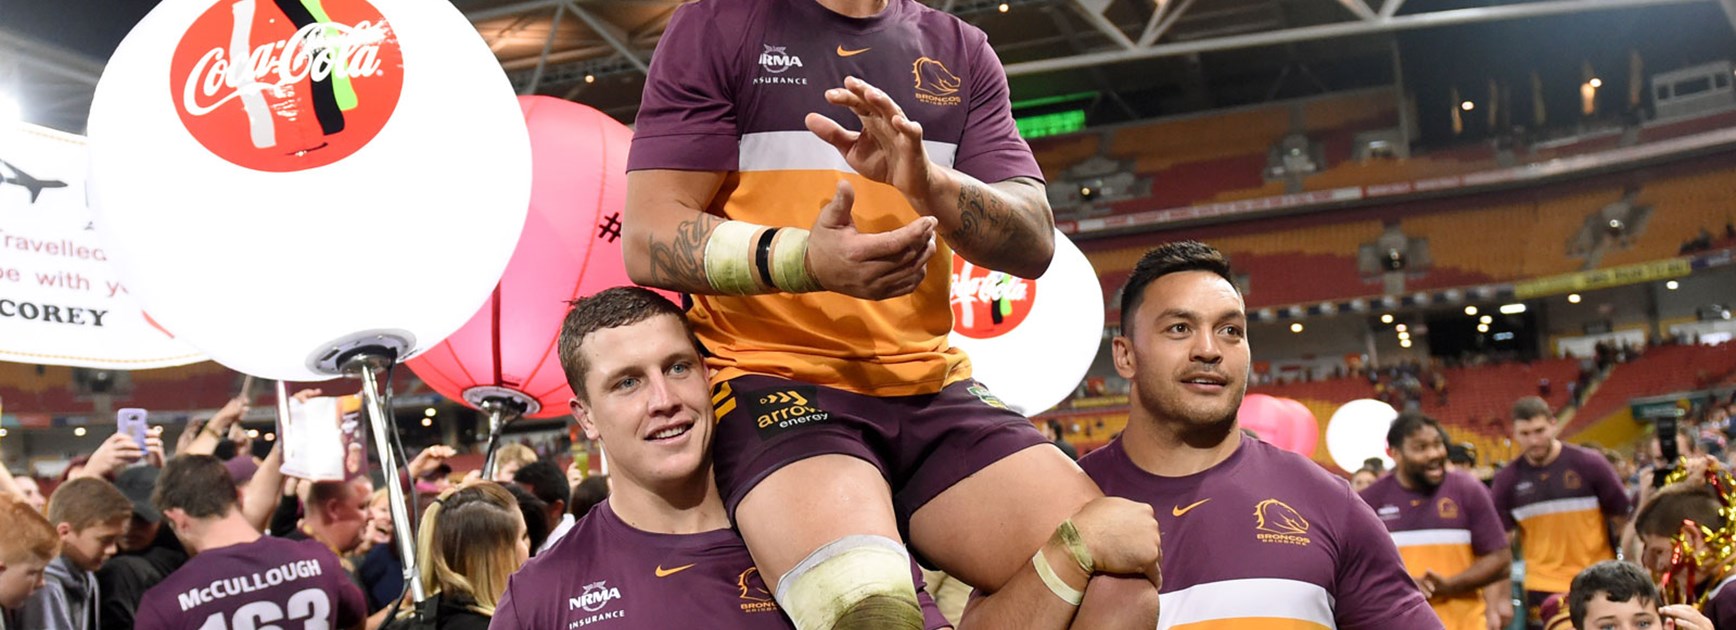 Broncos lock Corey Parker carried off in his farewell game at Suncorp Stadium.